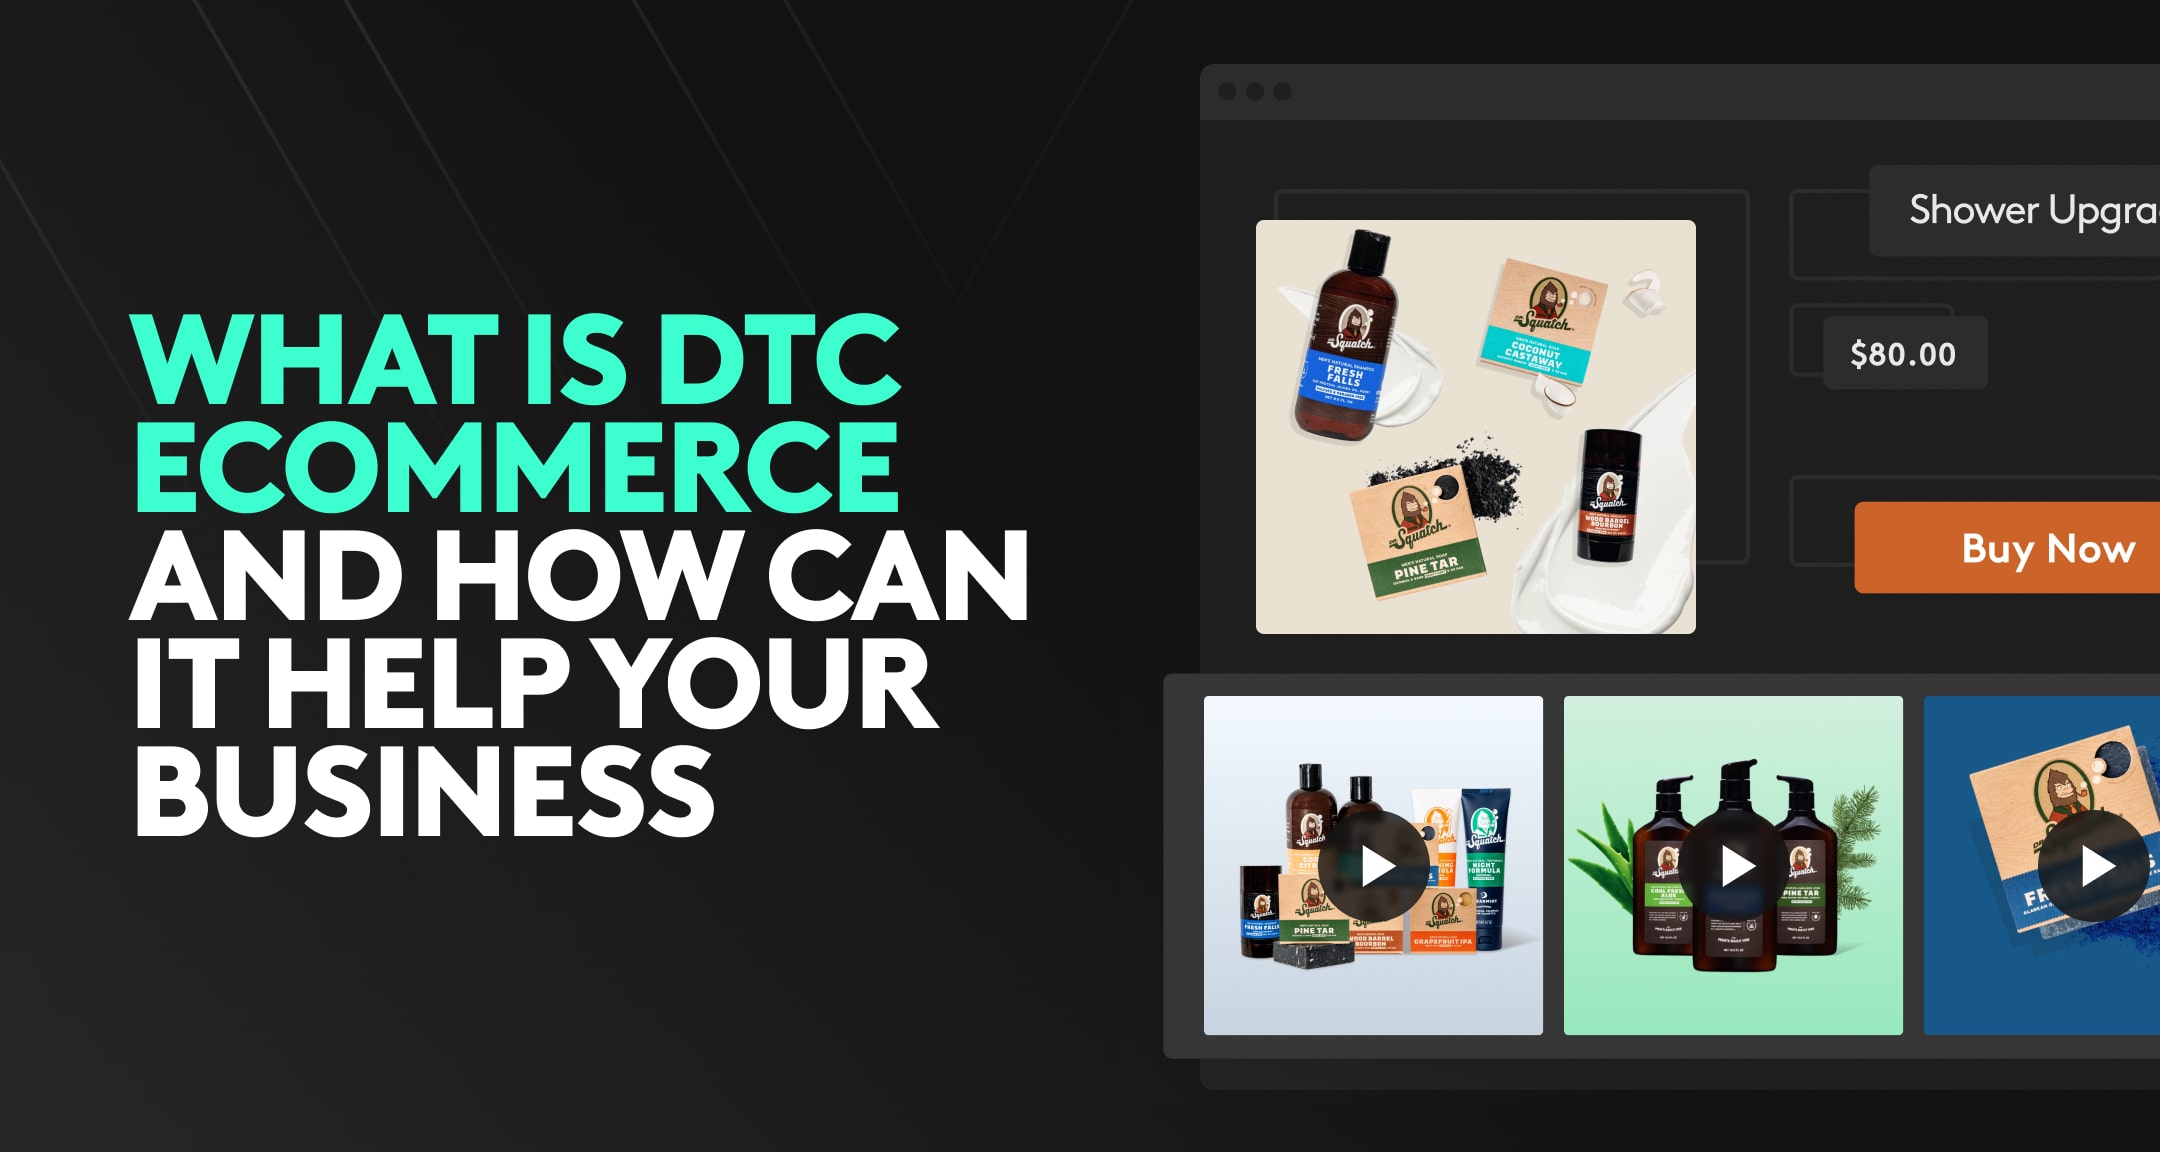 Dr. Squatch: When A DTC Darling Goes Omni-Channel